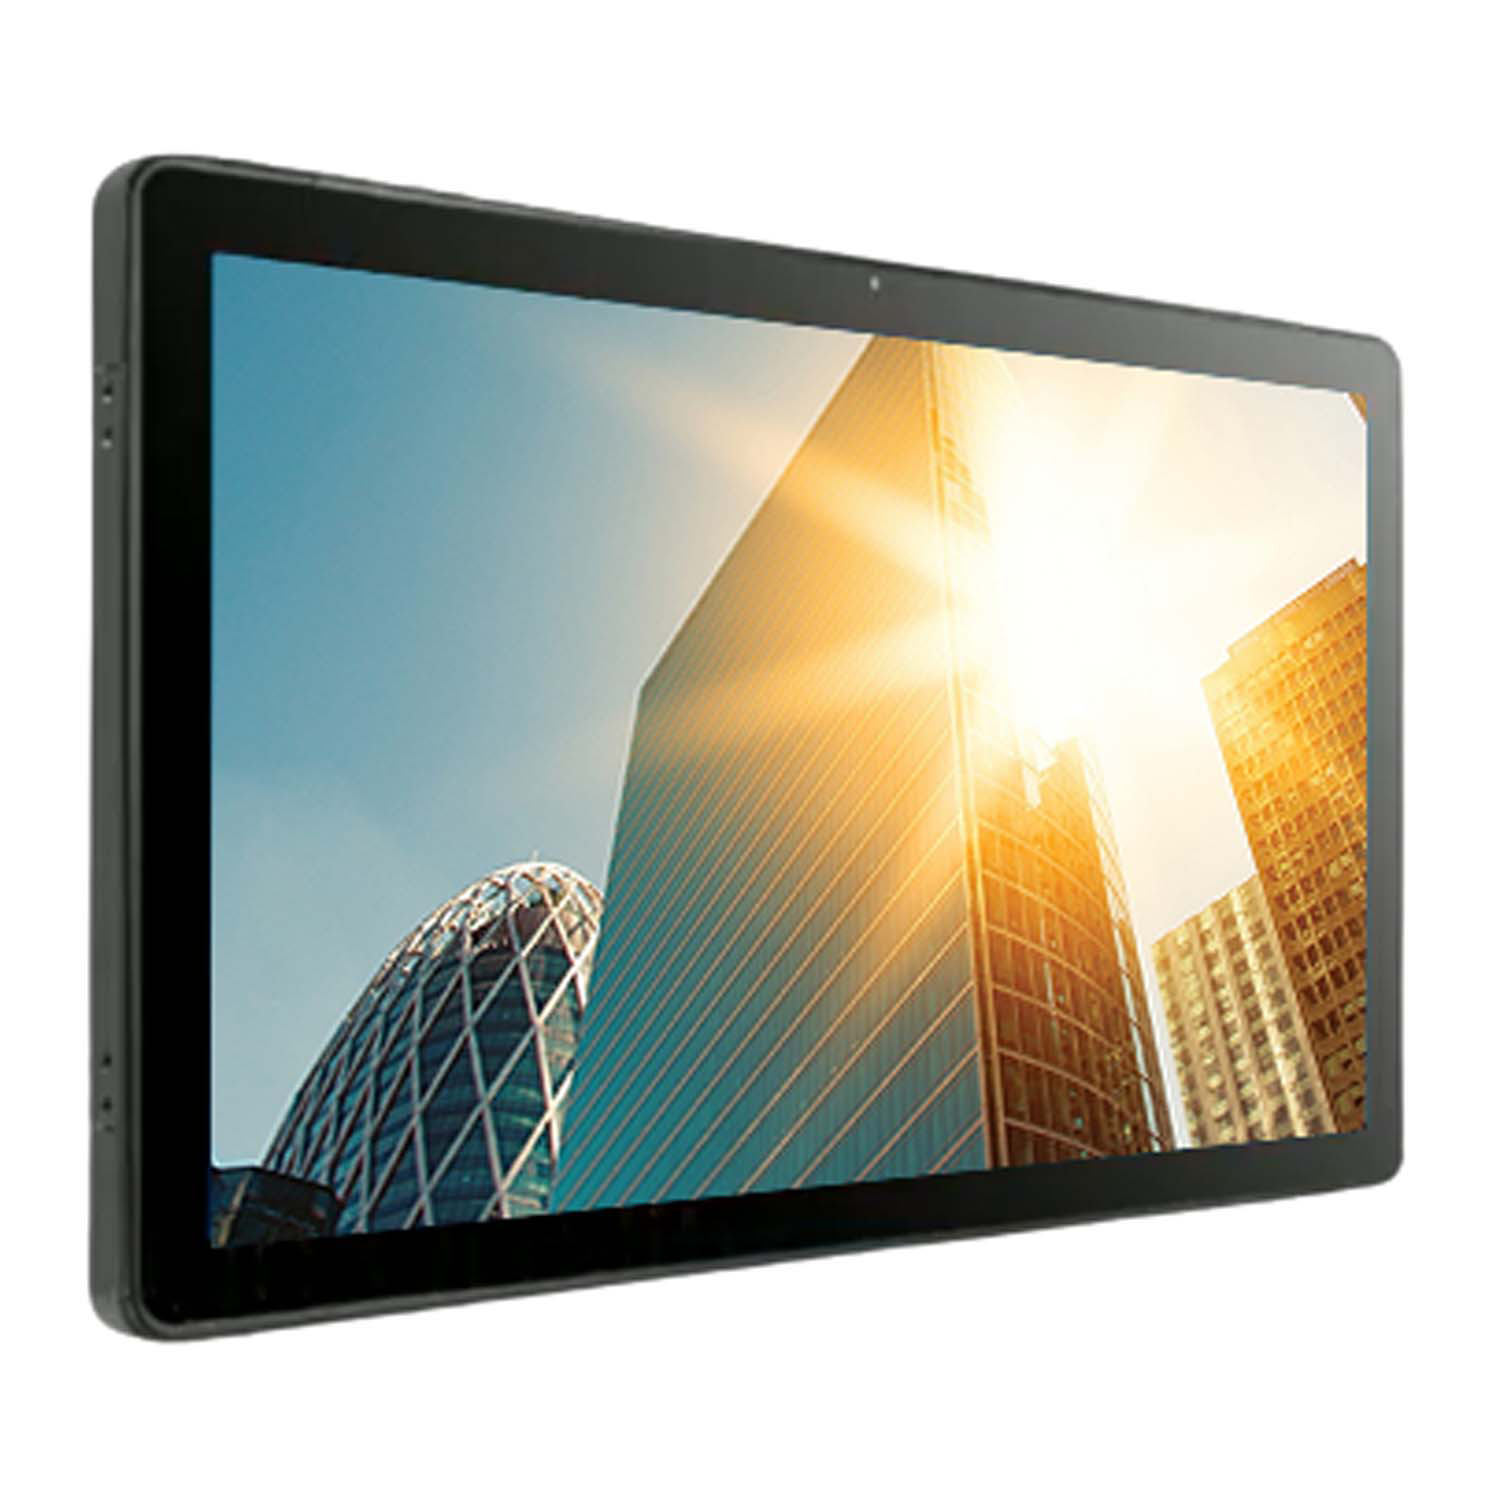 INDUSTRIAL OPEN FRAME HIGH BRIGHT TOUCH MONITOR KEETOUCH 27" KT-270-CHWSGF1